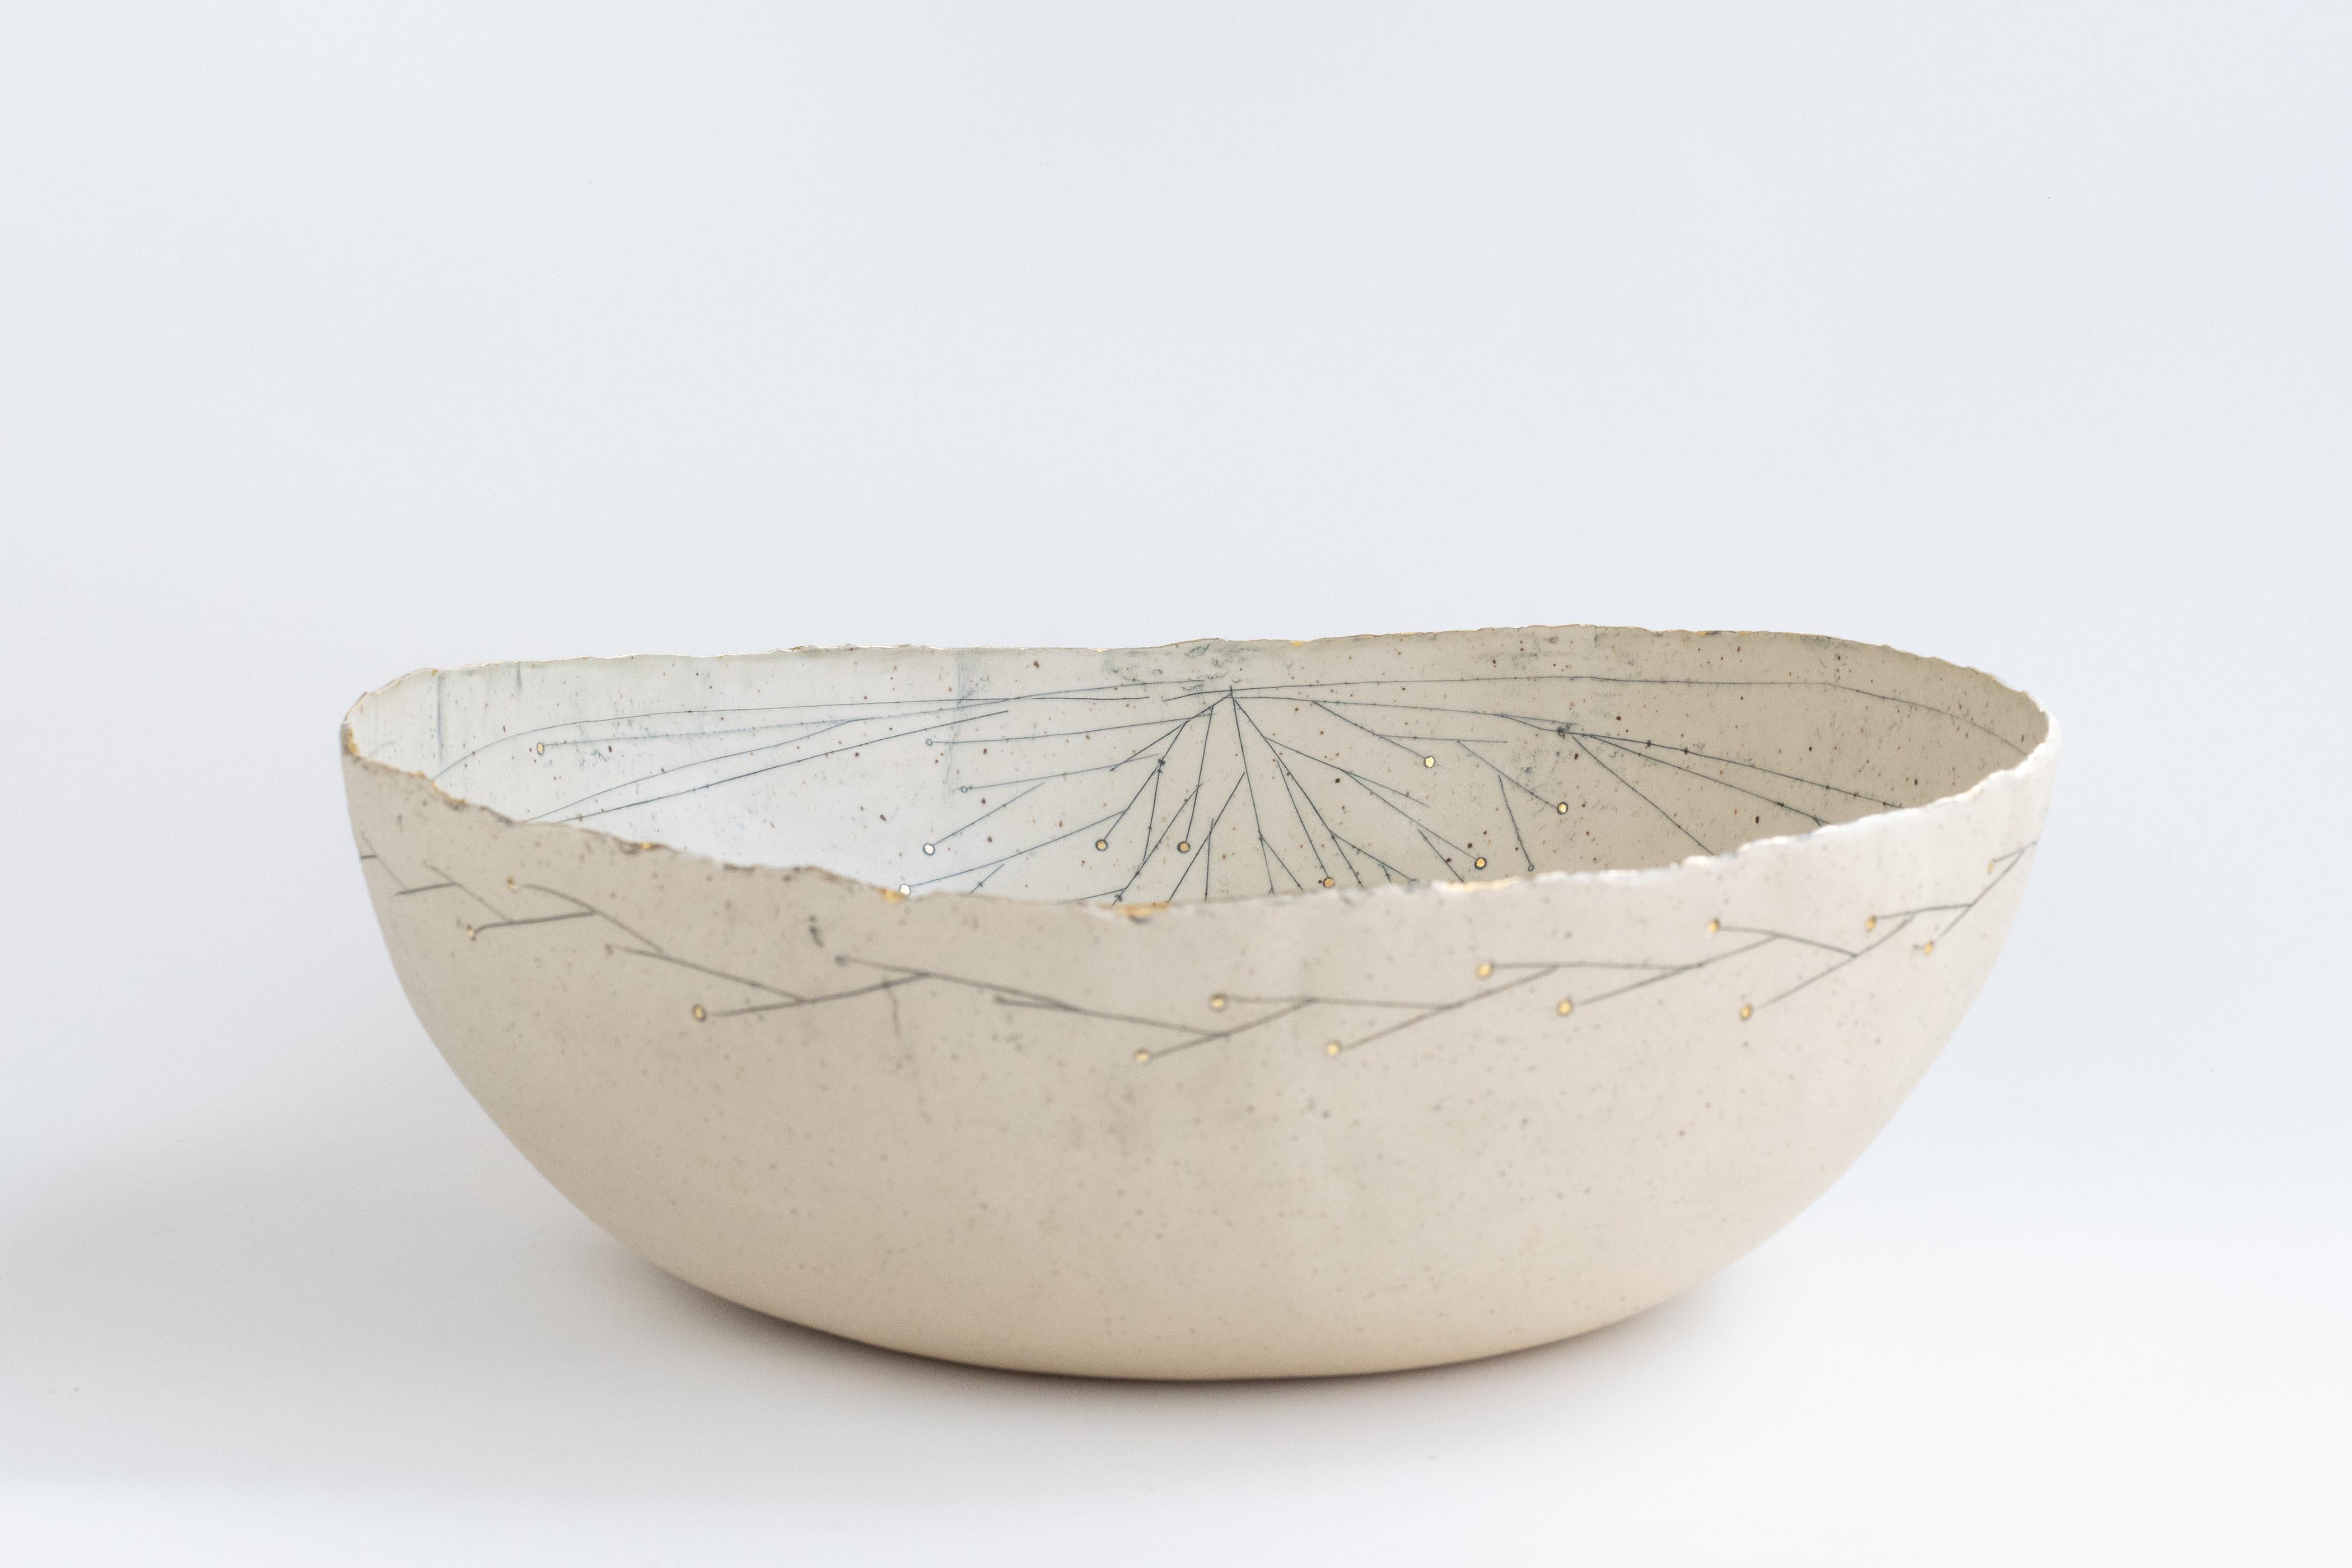 Hand Built Golden Promise Stoneware big bowl With 22kt gold detail by Helen Prior

A delicate hand-crafted bowl, organic in shape with a torn clay edge in natural speckled stoneware clay.
Part of the Golden Promise Series- a theme of abstracted and